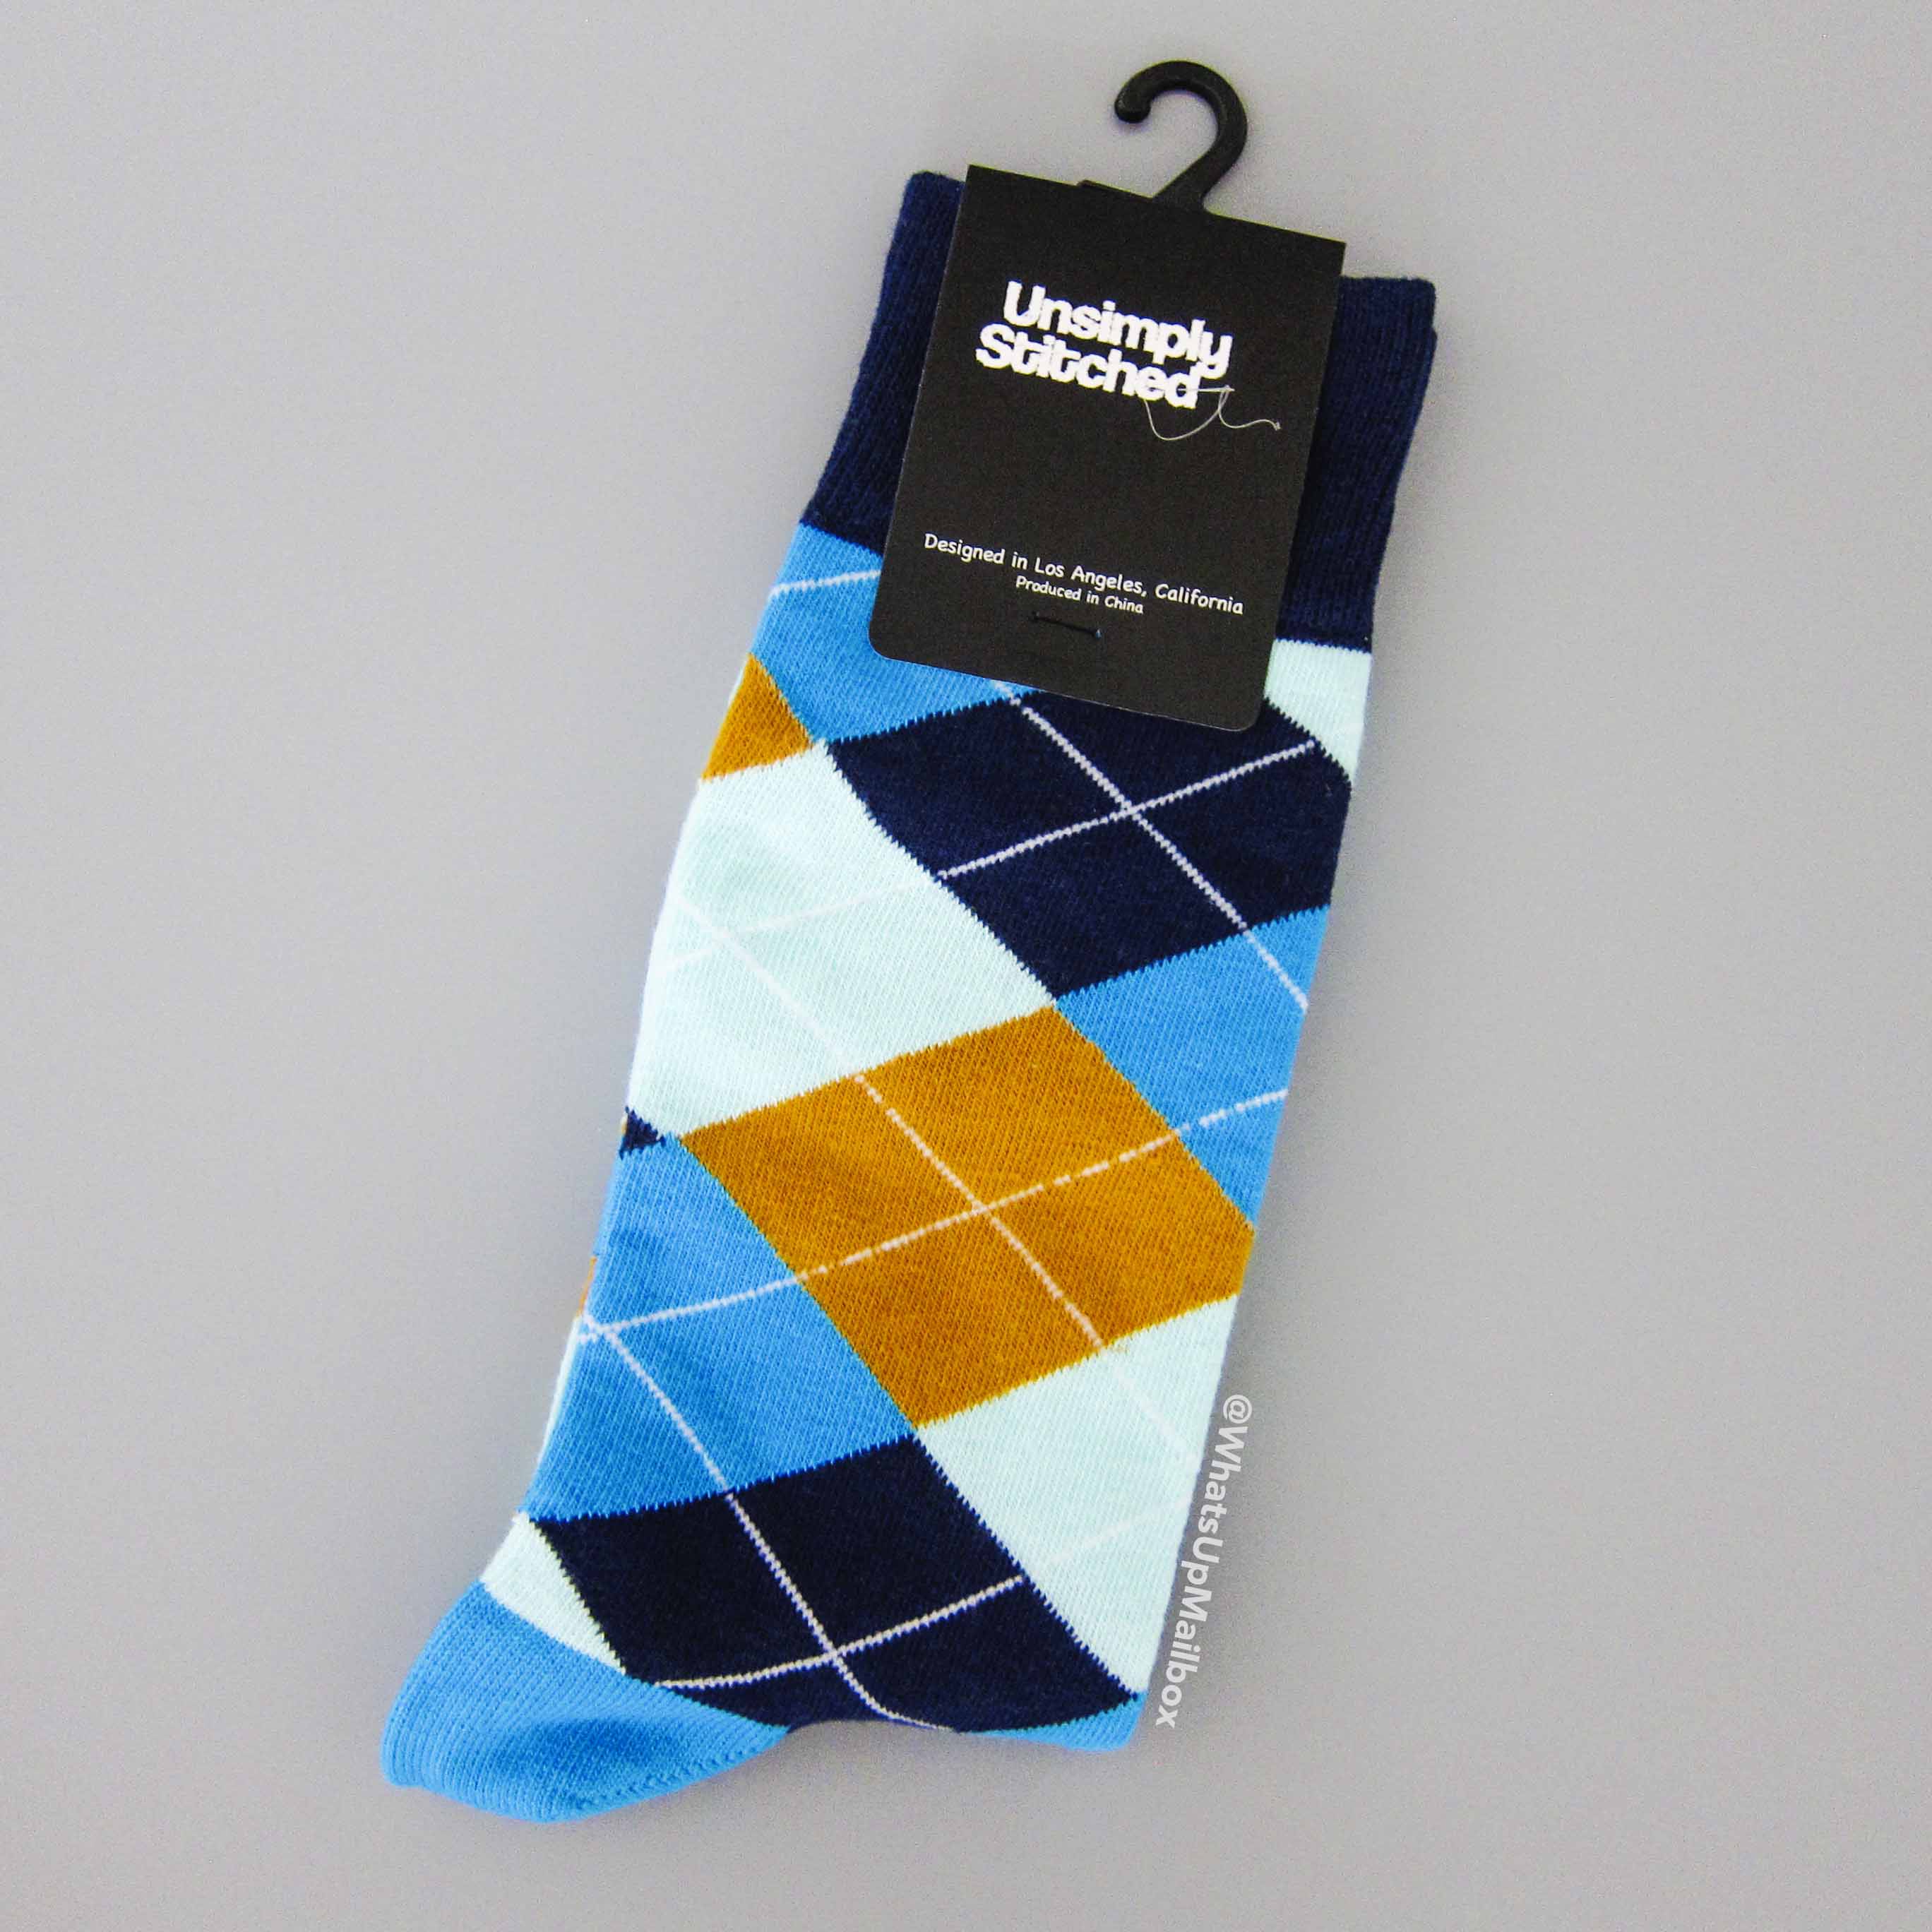 Unsimply Stitched Socks